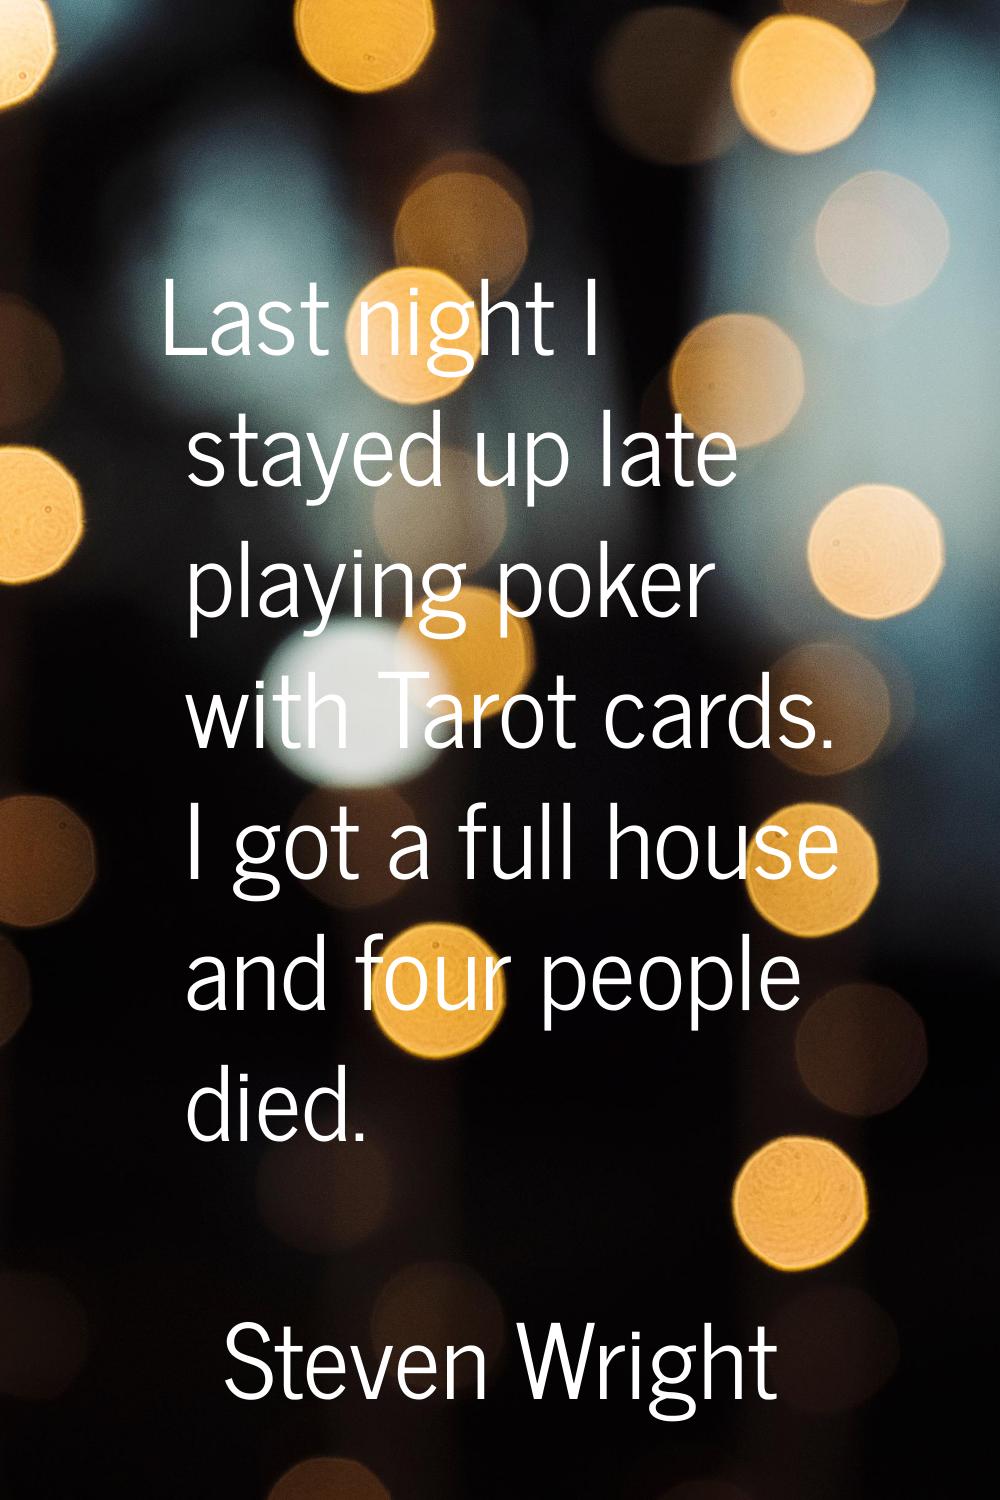 Last night I stayed up late playing poker with Tarot cards. I got a full house and four people died